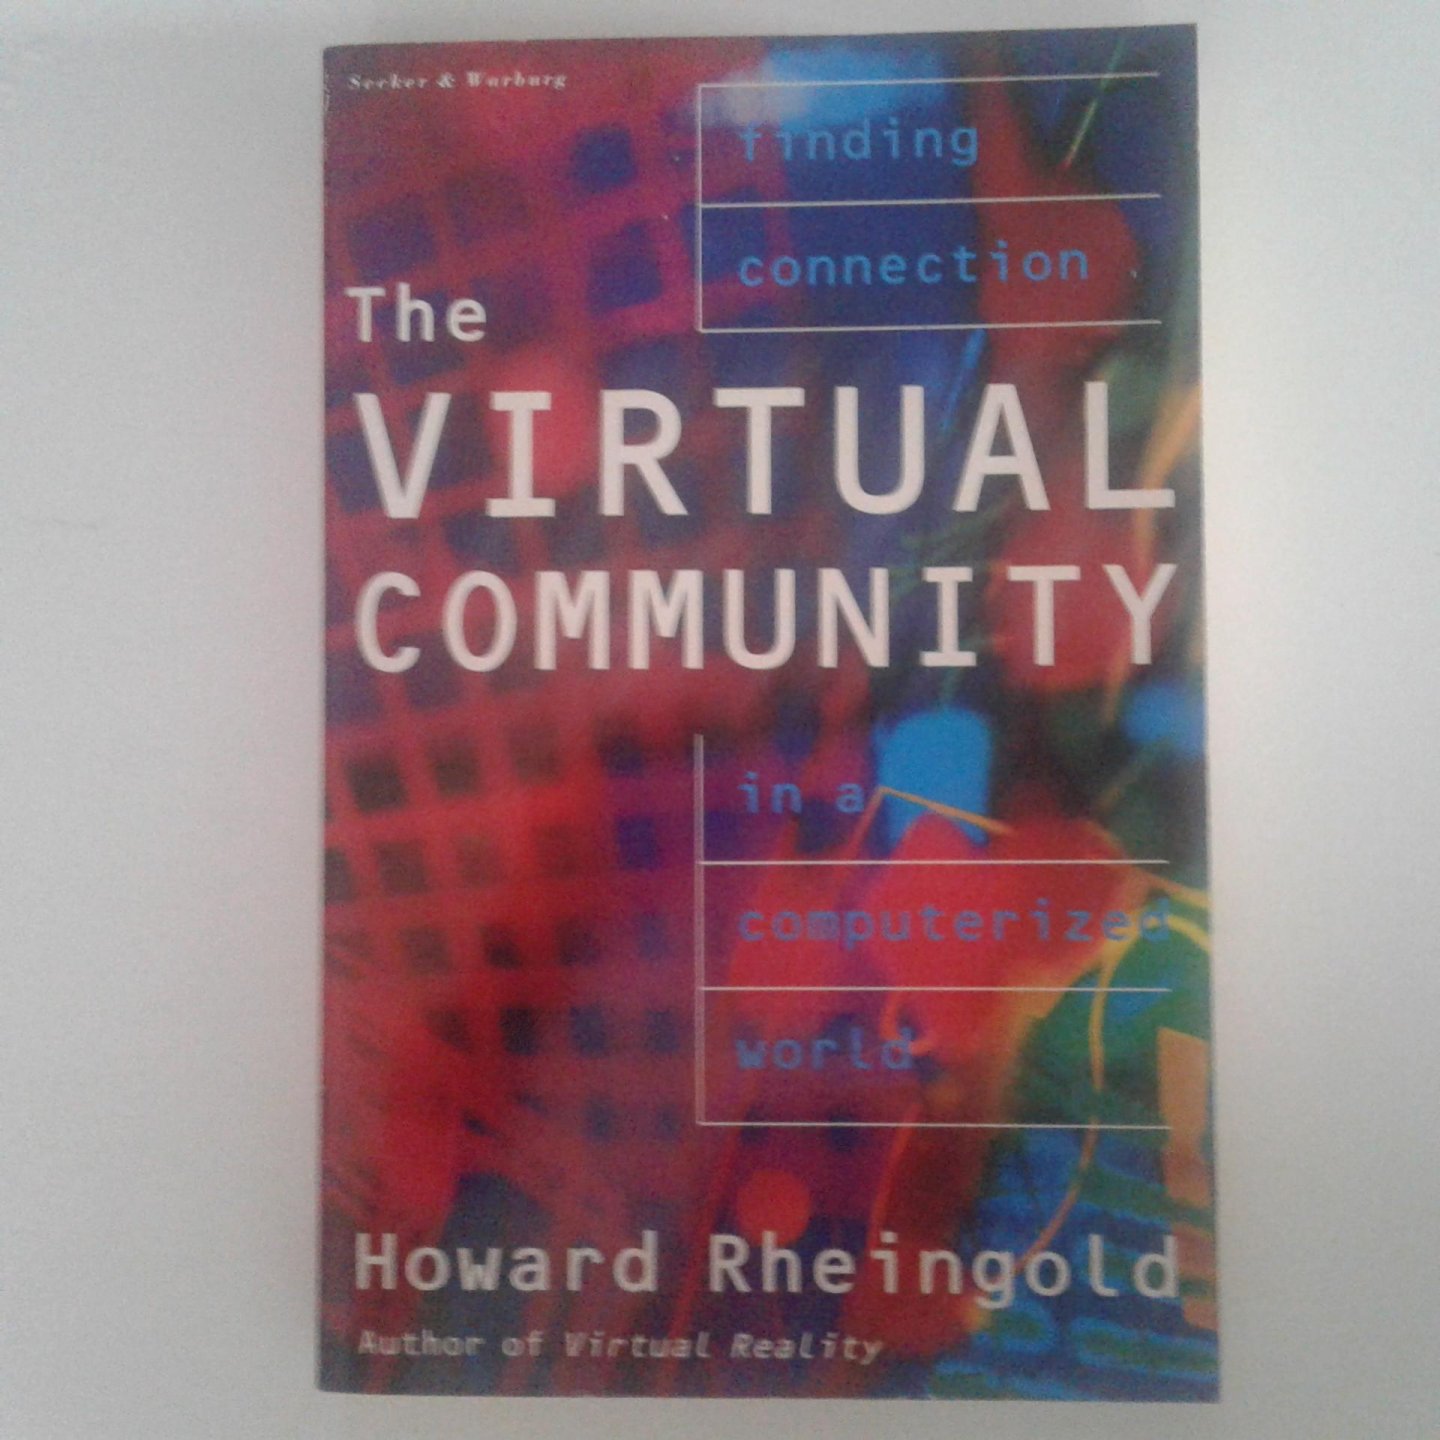 Rheingold, Howard - The Virtual Community ; Finding Connection in a Computerized World